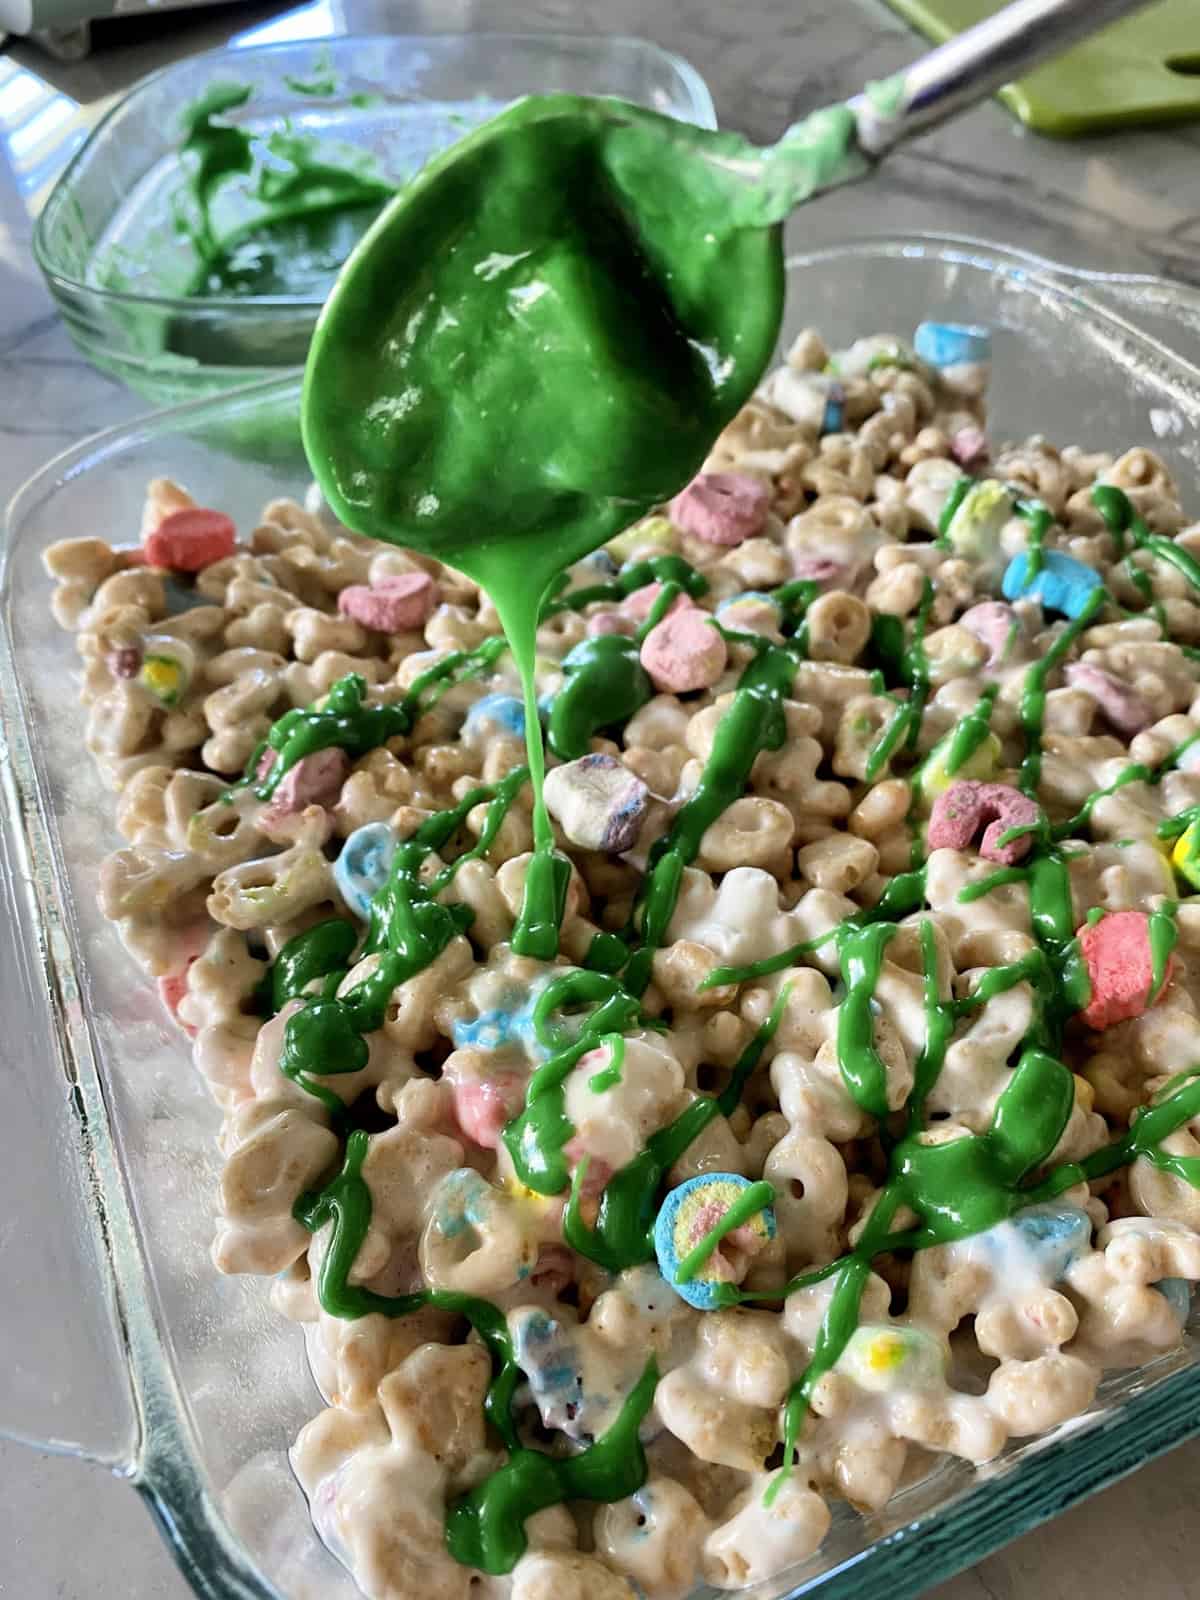 Drizzling green dyed white chocolate on top of Lucky Charms Cereal Treats in casserole dish.